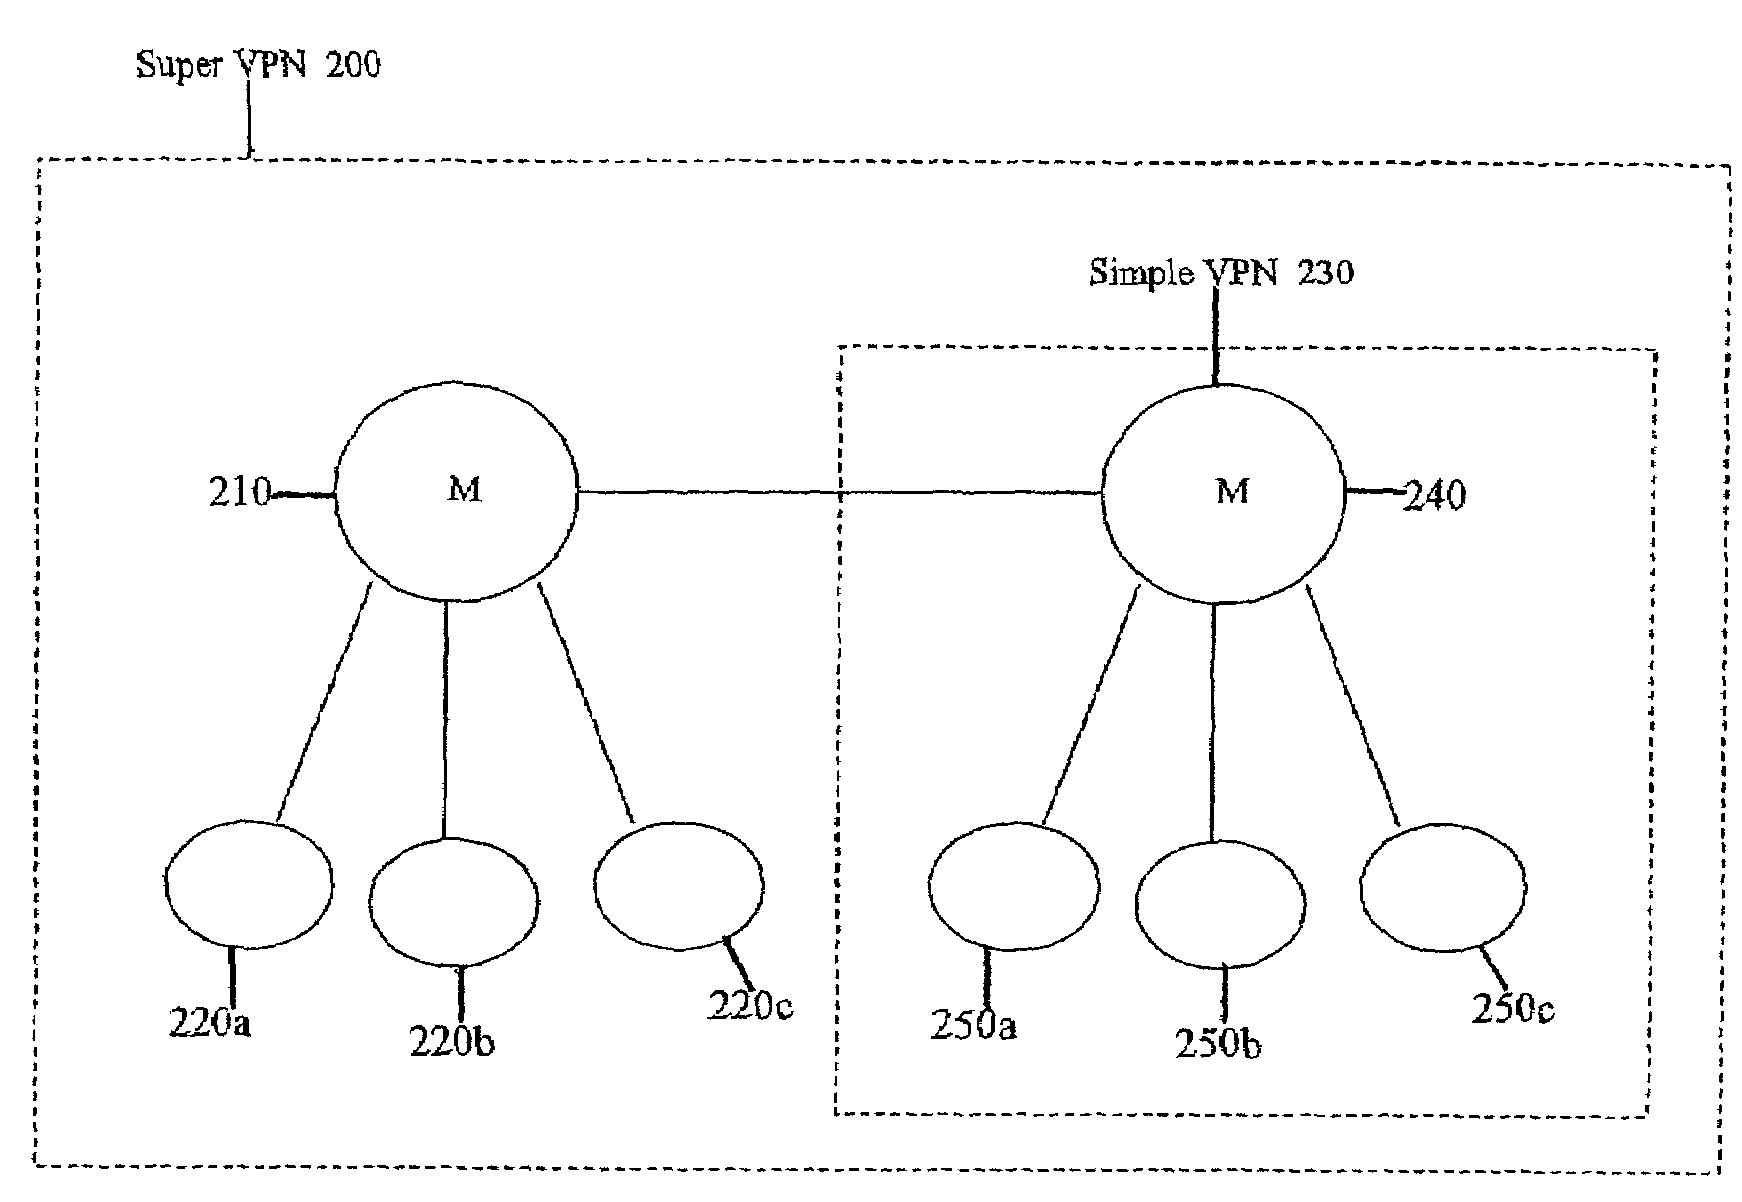 Methods and apparatus for scalable, distributed management of virtual private networks